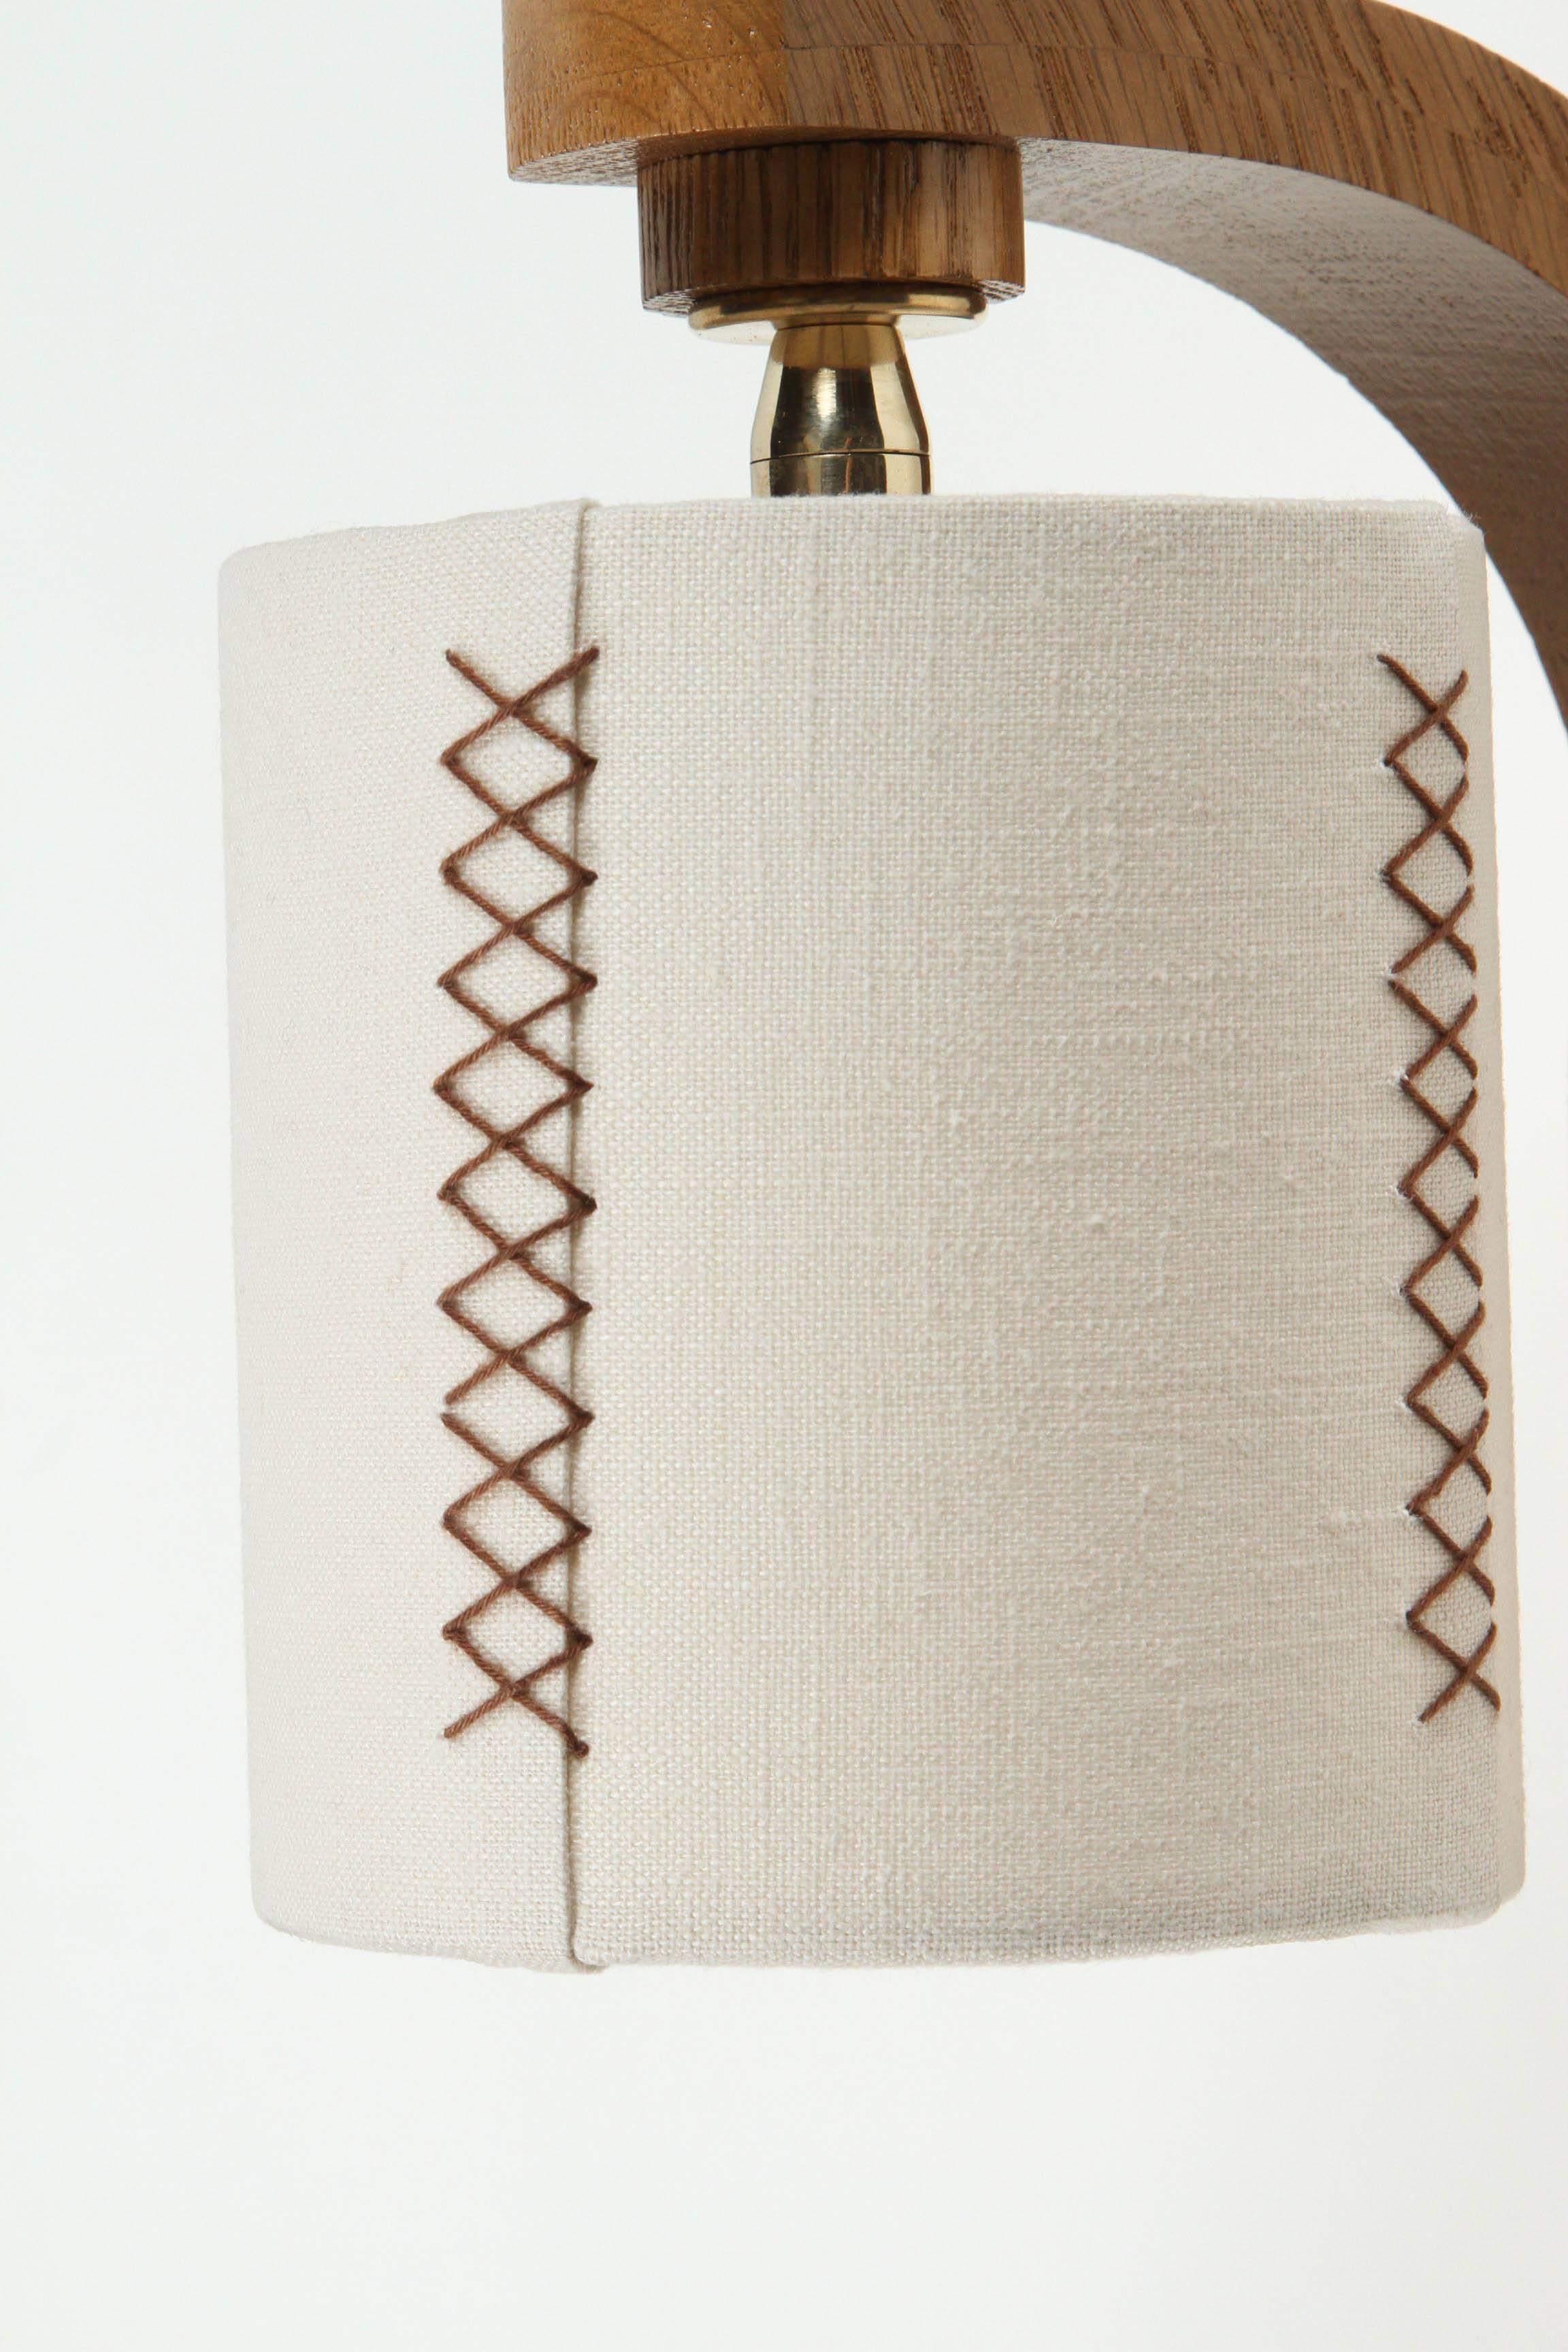 Paul Marra Oak Sconce with Hand-Stitched Linen Shade 1